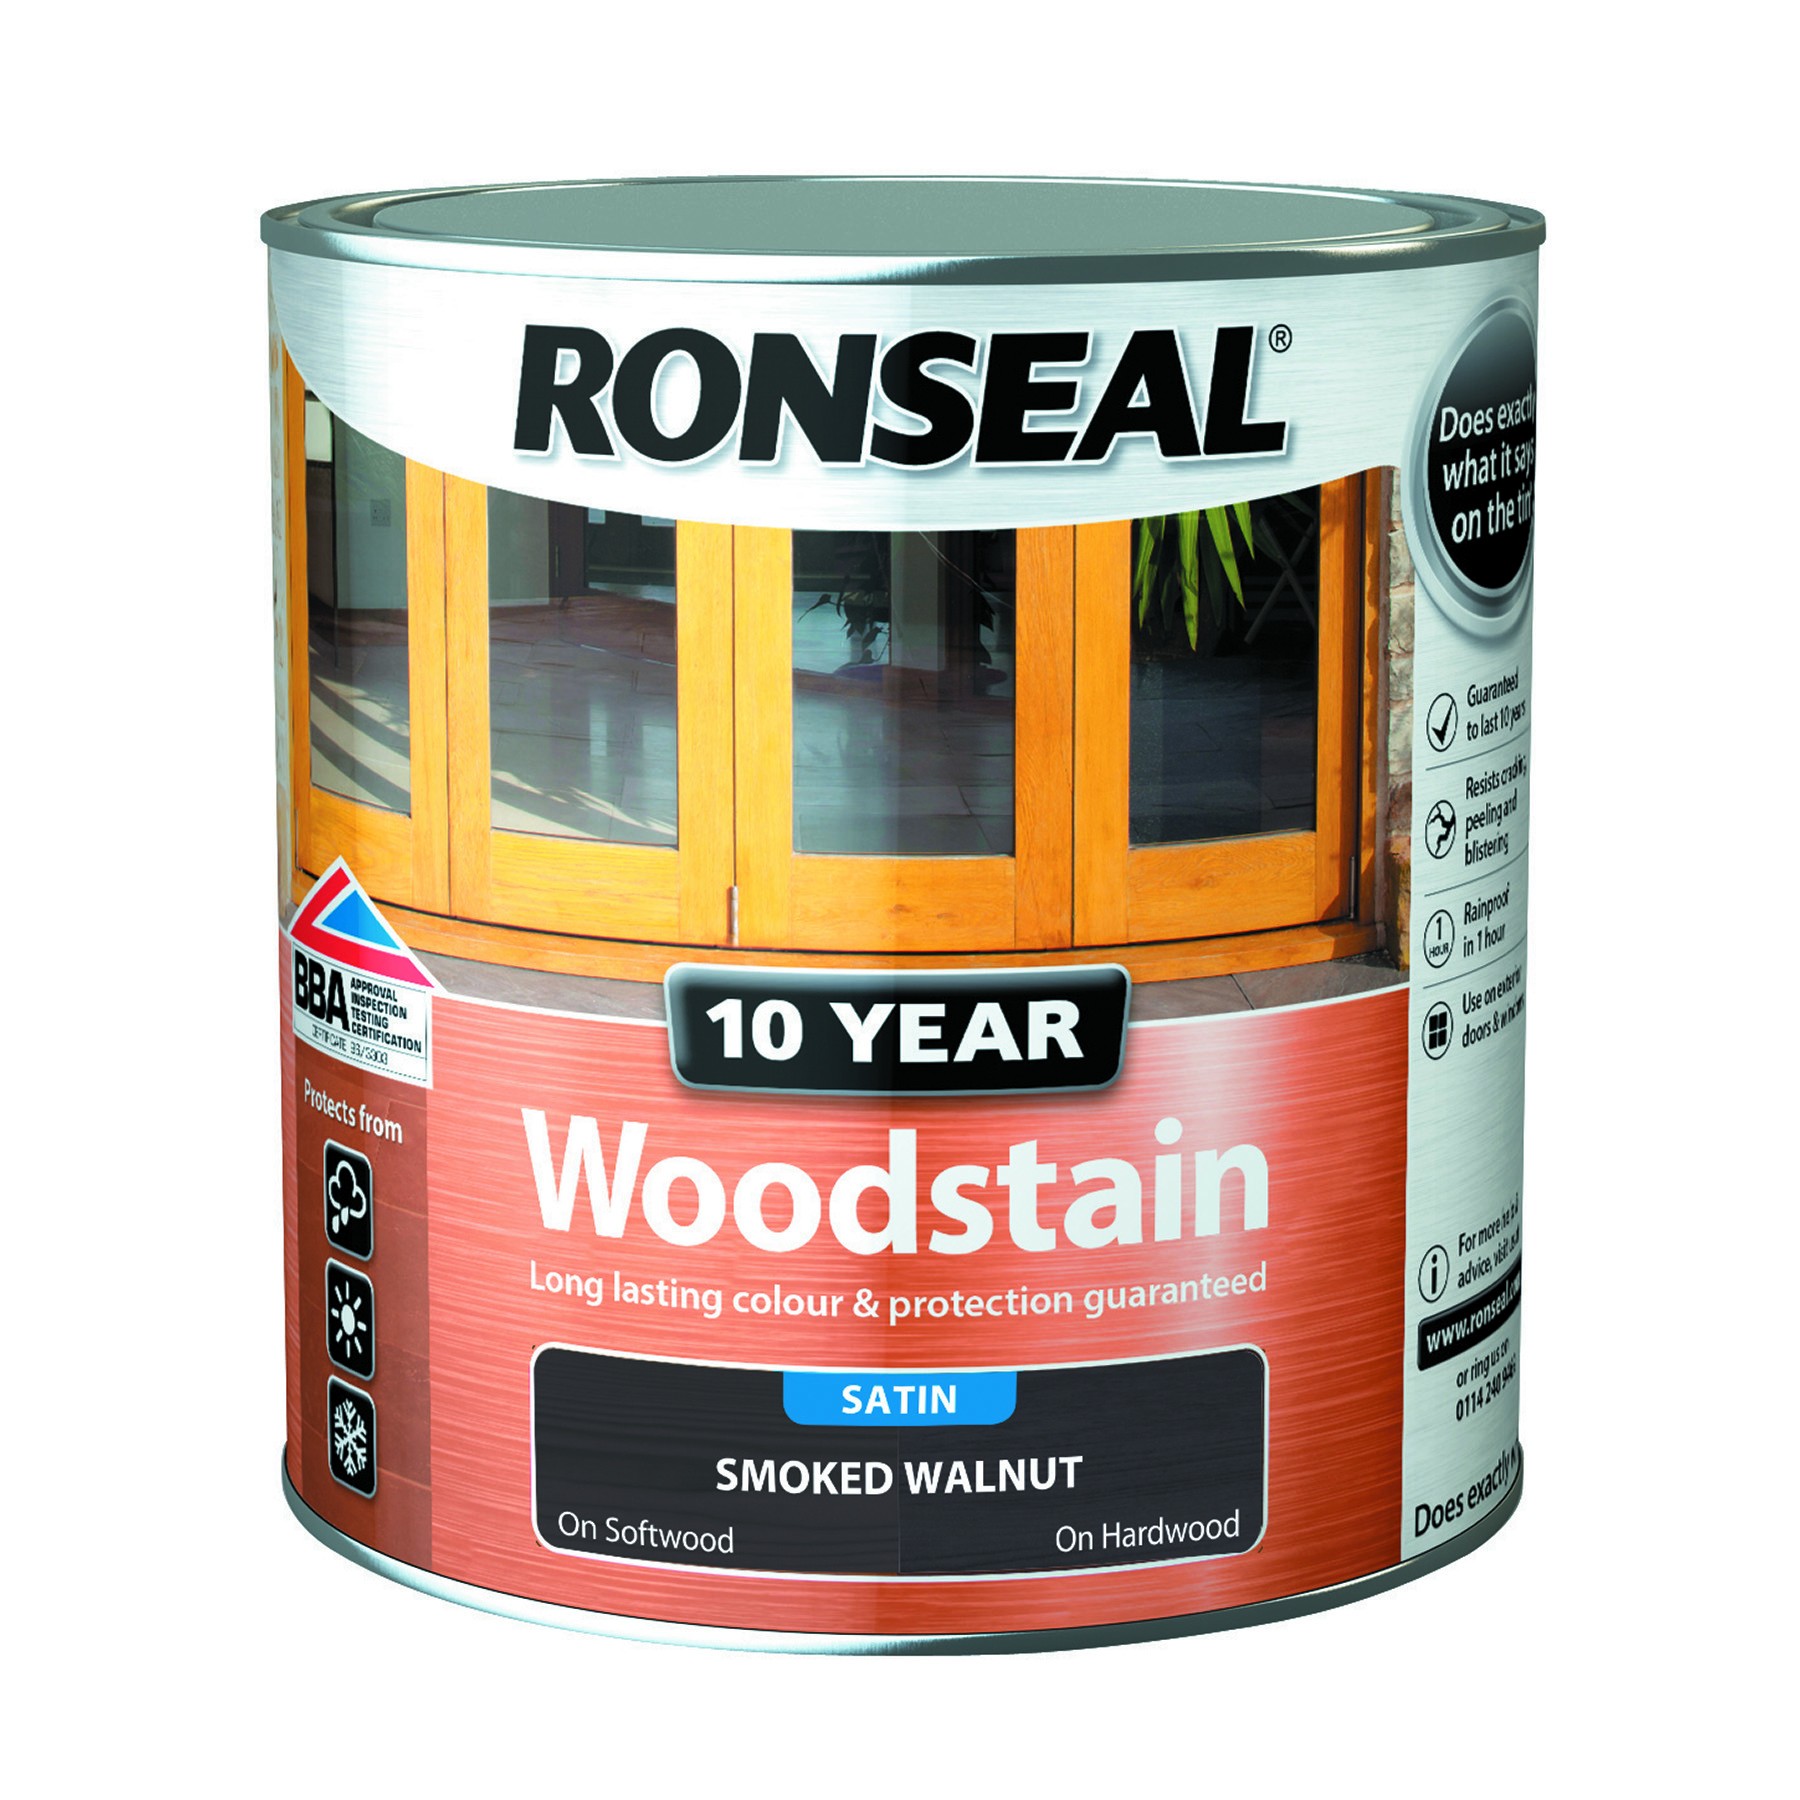 Ronseal 10 Year Woodstain 2.5L Satin Natural Oak [RON38694]